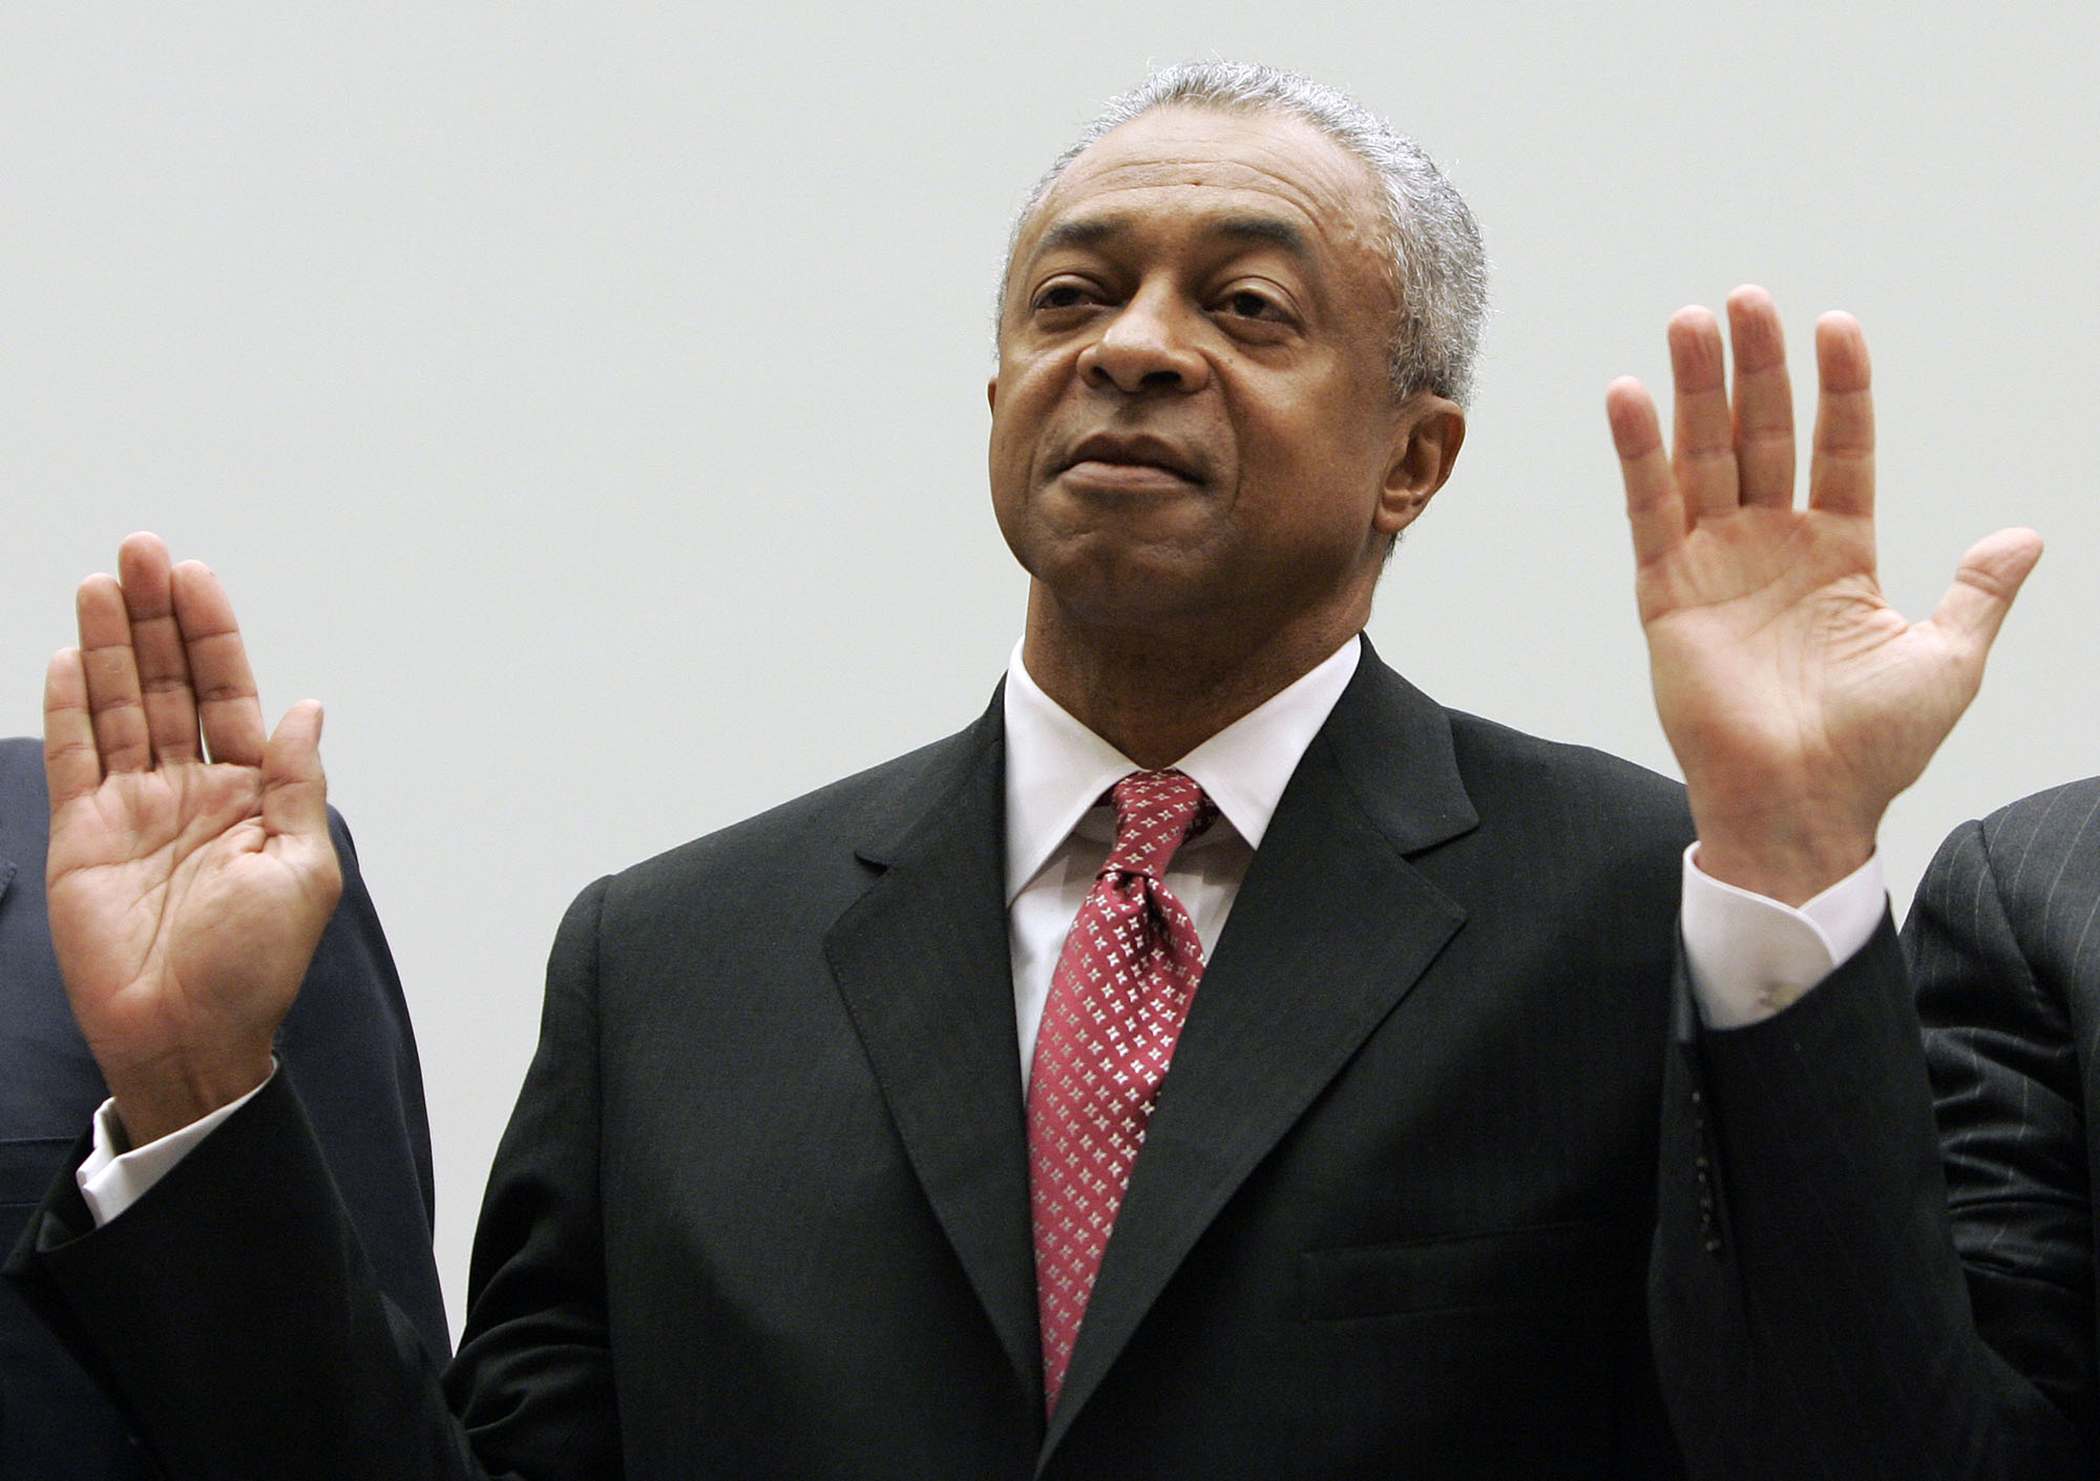 E. Stanley O'Neal, former Chairman and CEO of Merrill Lynch, is sworn in before the House Oversight and Government Reform Committee hearing on Capitol Hill in Washington, March 7, 2008 in Washington. The committee is examining the compensation and retirement packages granted to the CEOs of corporations deeply involved in the current mortgage crisis.